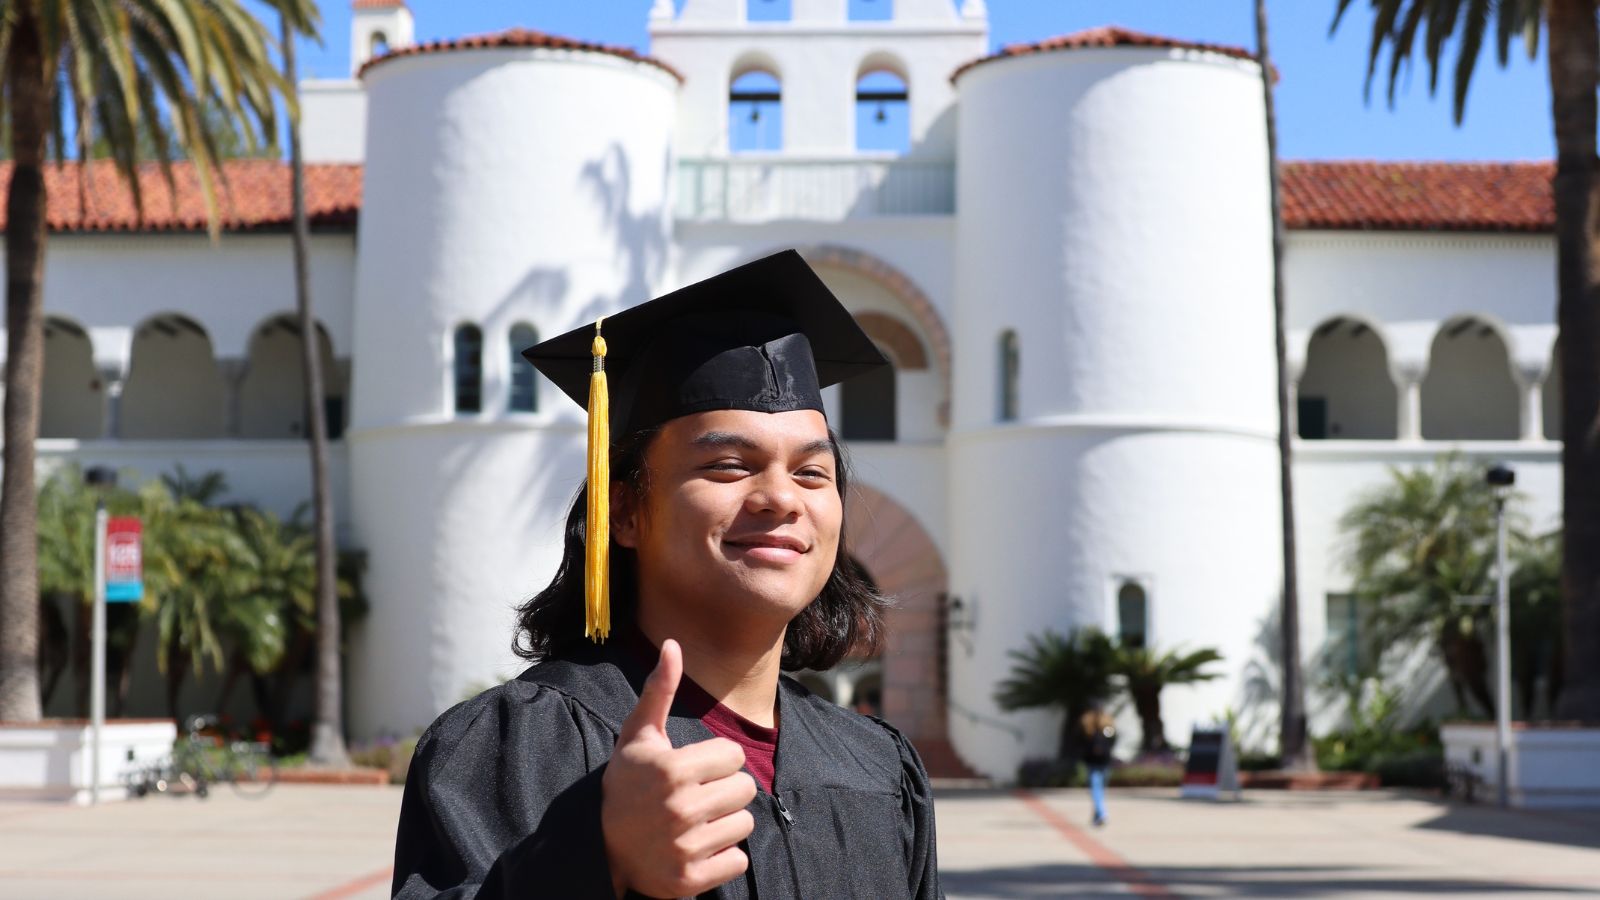 Aerospace engineering senior Jarred Sampayan is featured in this list of best spots on campus for the Class of 2023 to take their graduation photos.